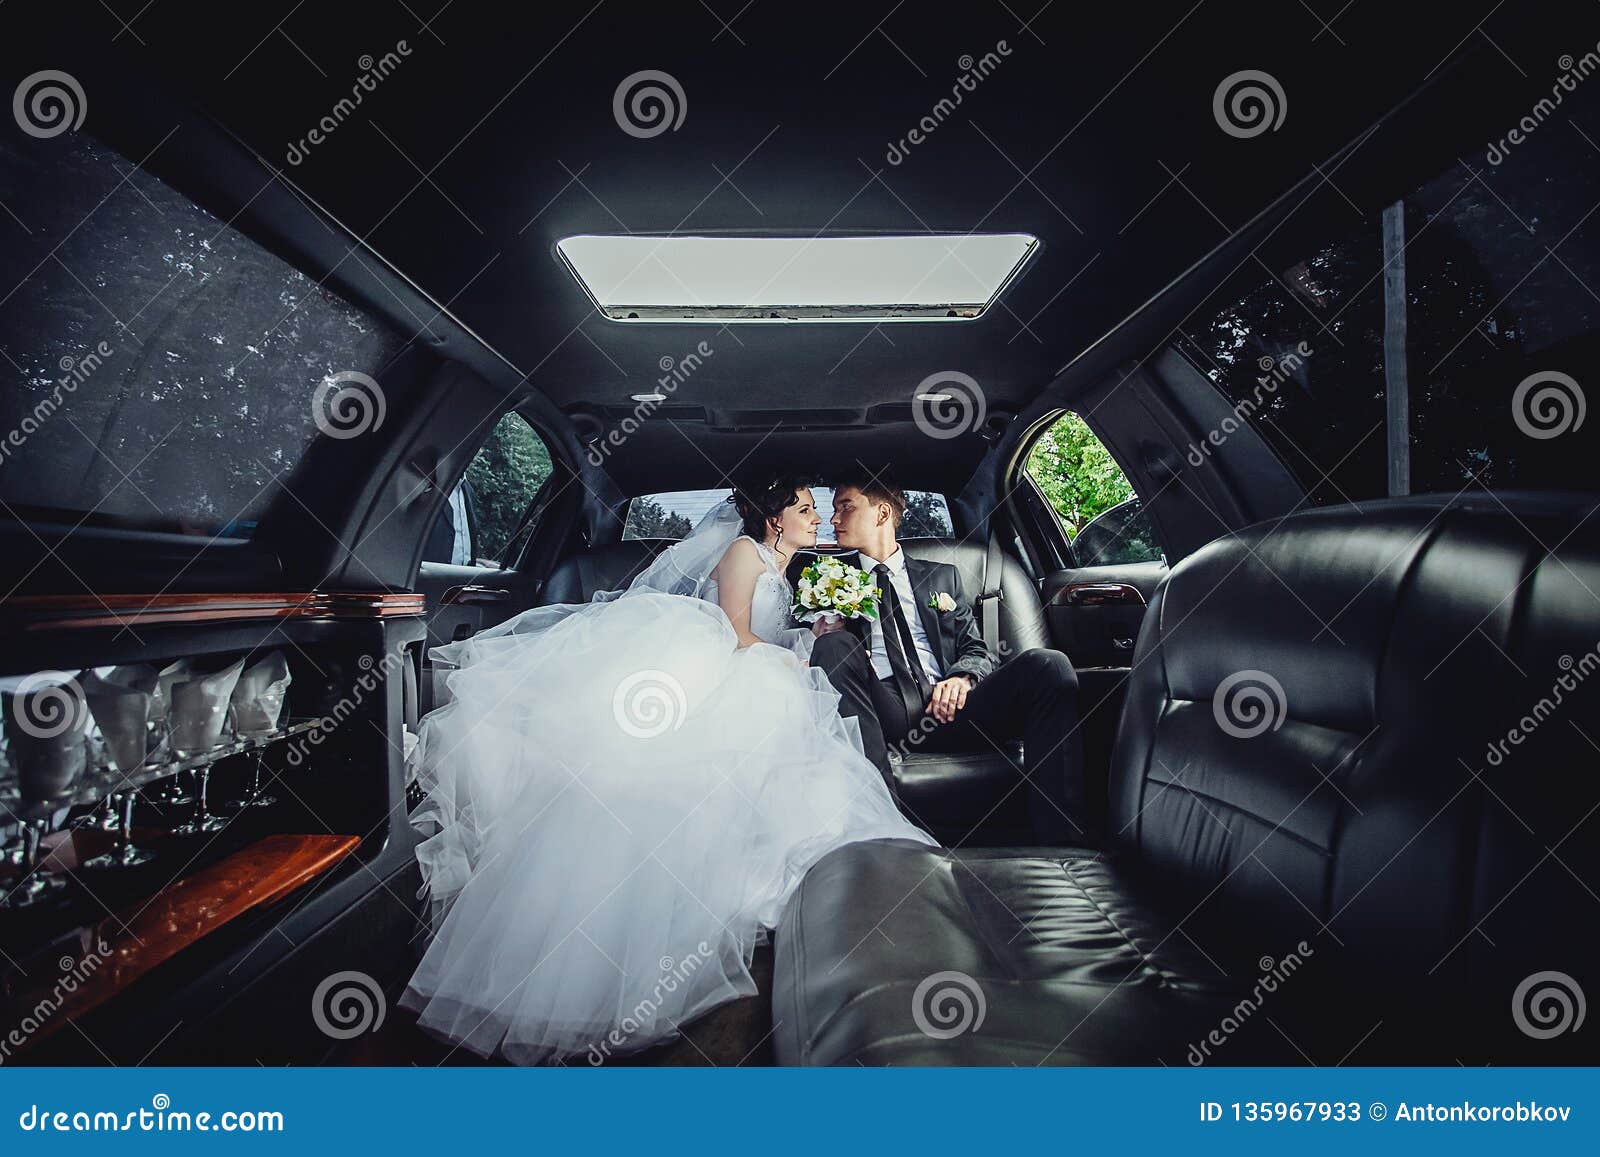 the couple sitting in the limo. portrait of a beautiful young couple who rides around the city